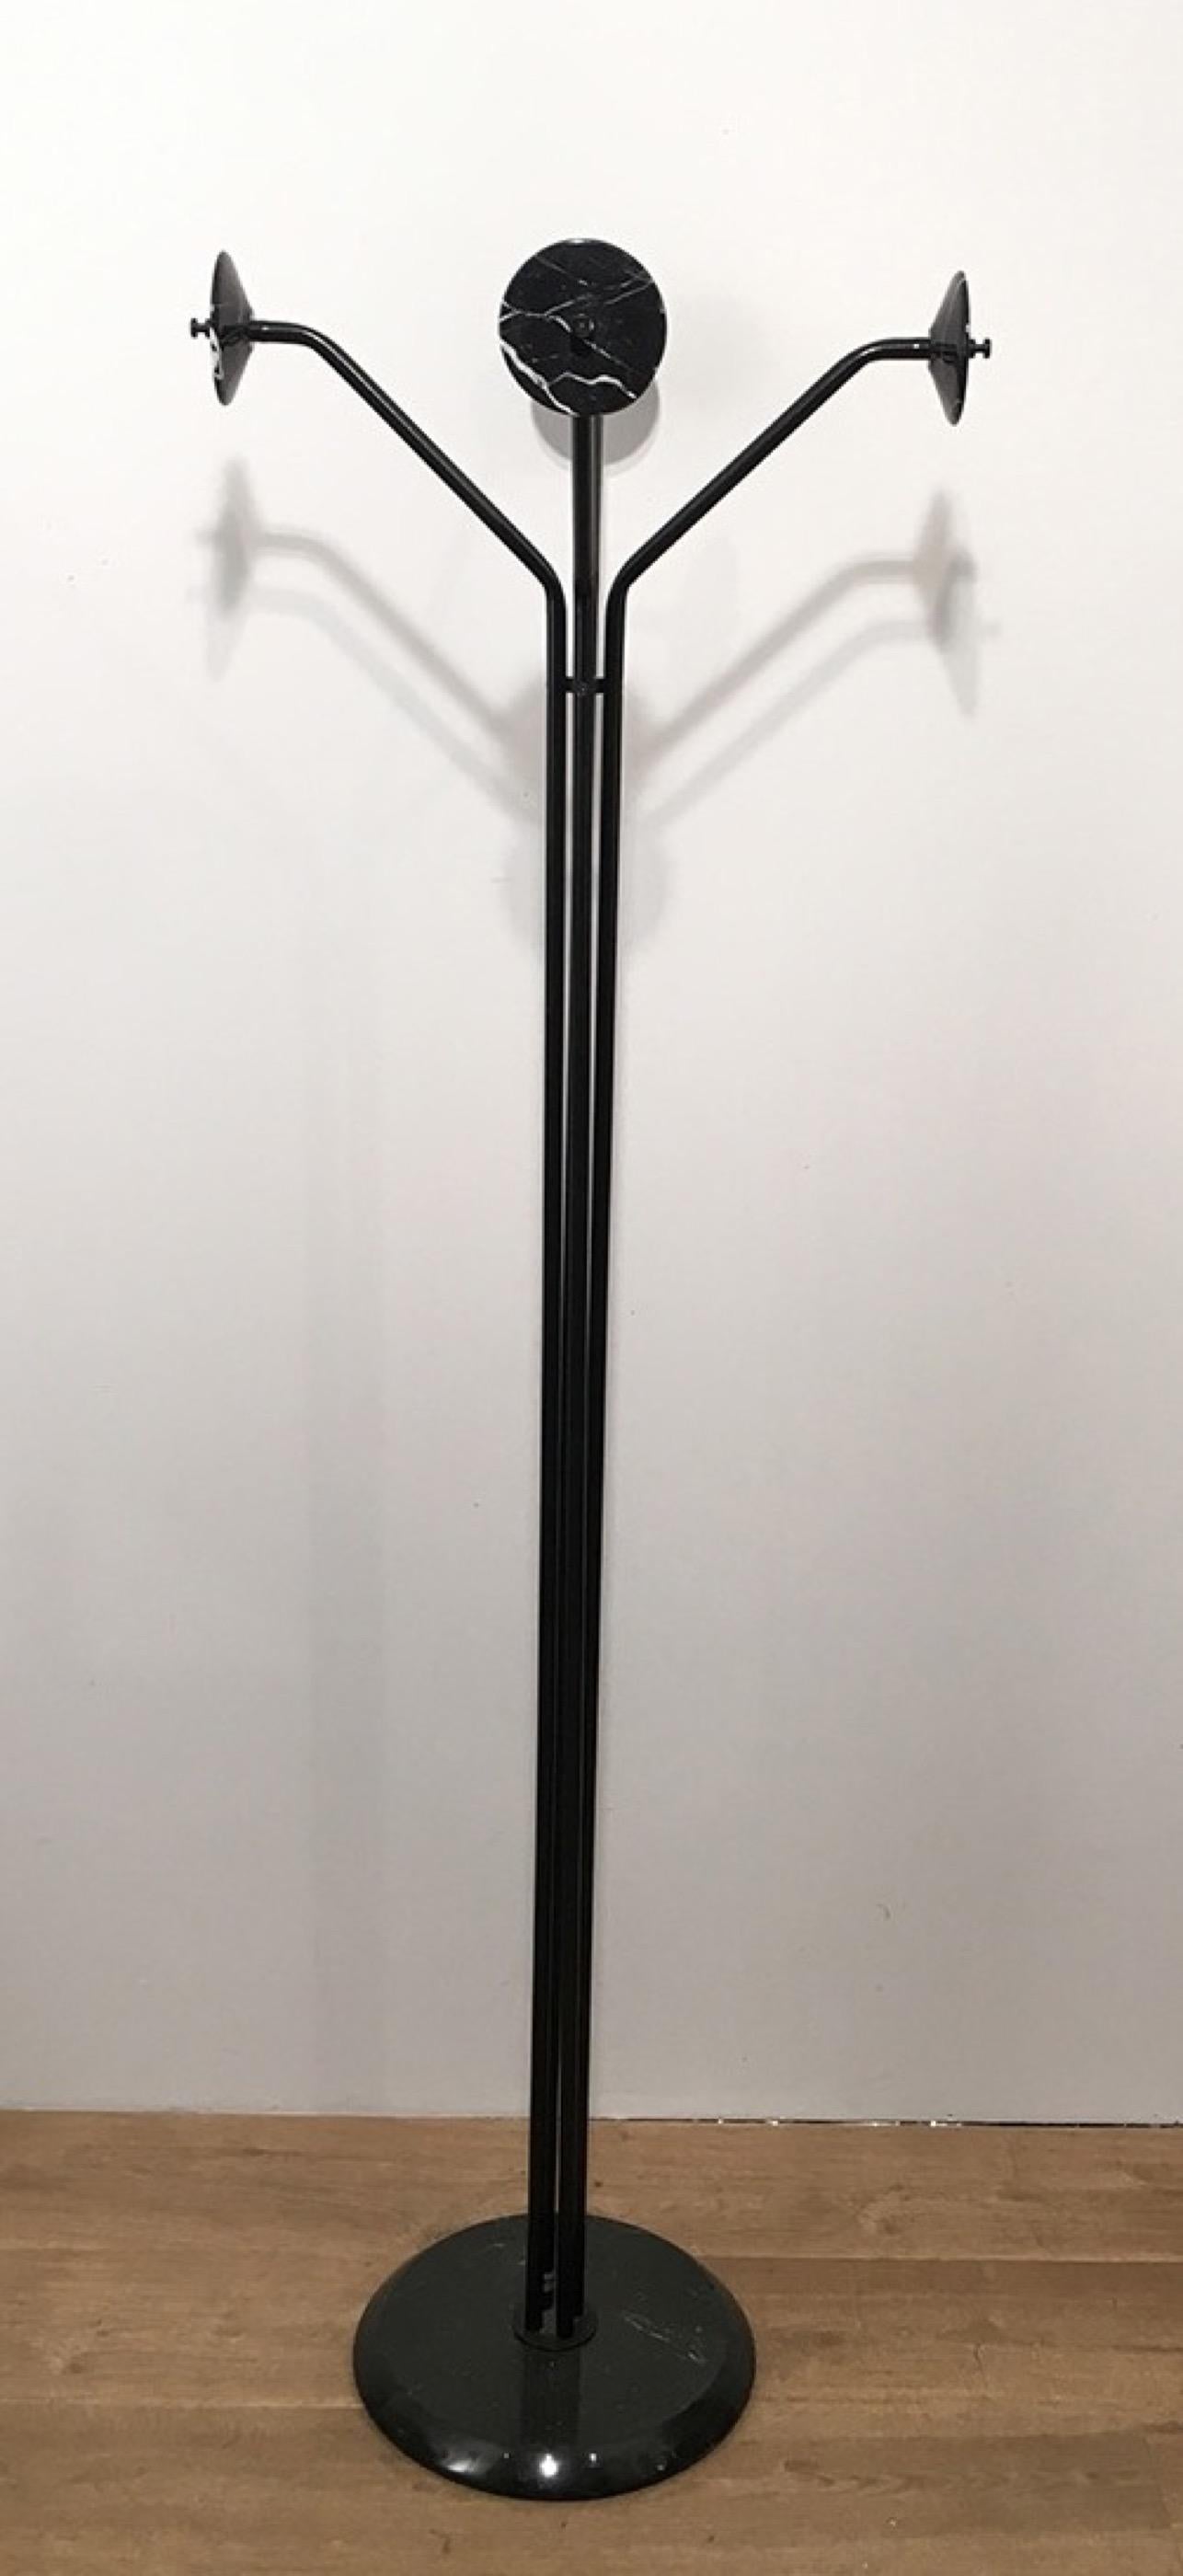 This coat rack is made of black lacquered metal and black marble. The base is made of marble as well as the hooks. This is an Italian design made by Piero de Longhi. Lolo coat rack. By Fly Line. 1978.